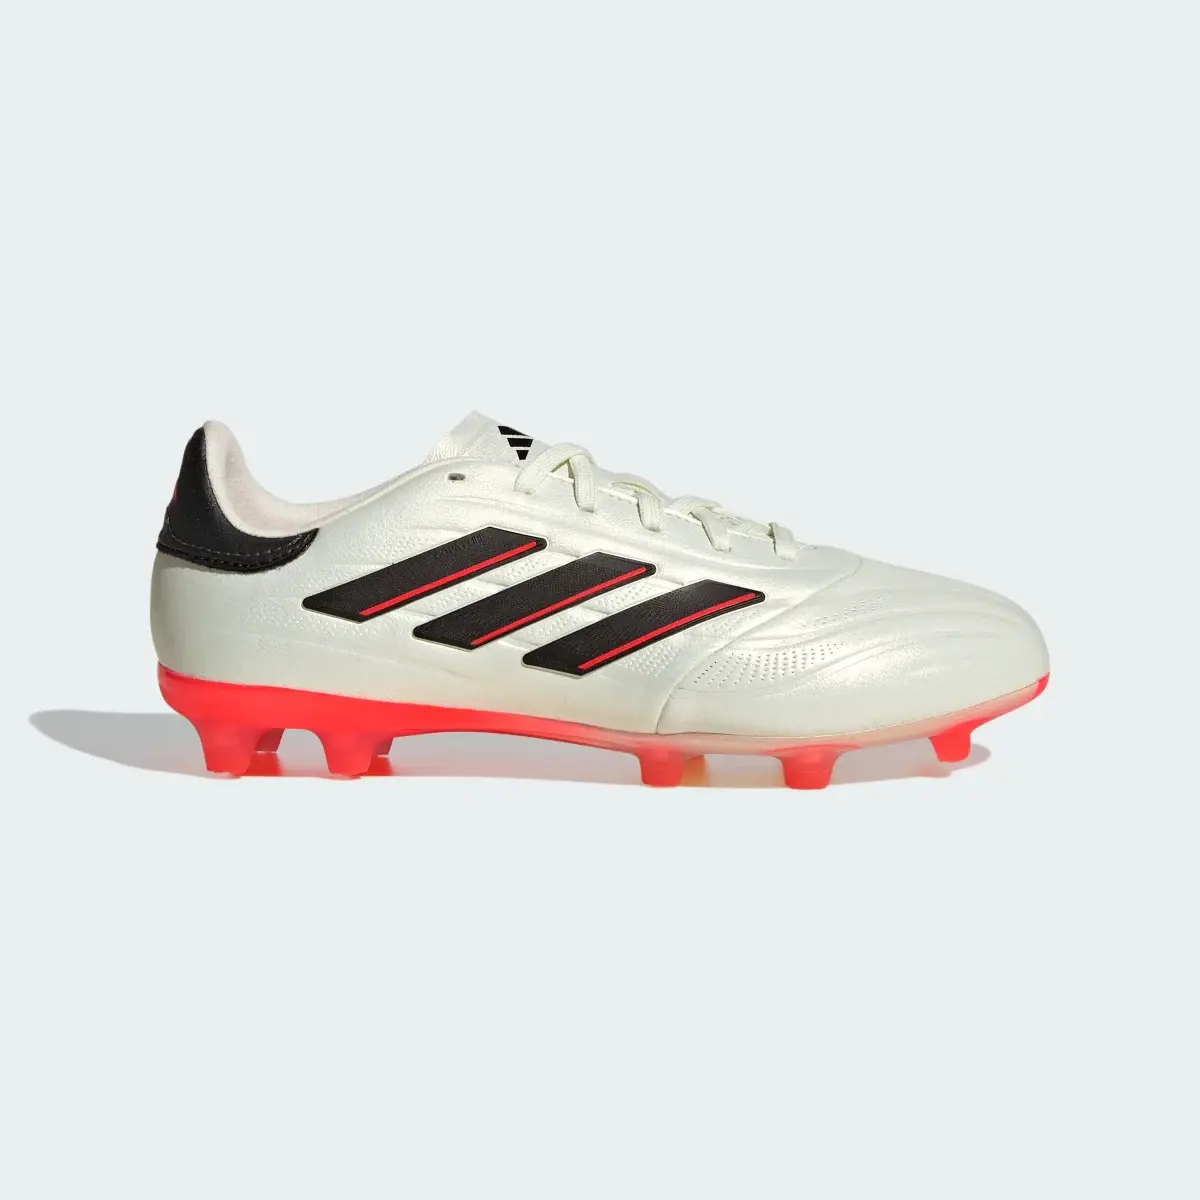 Adidas Copa Pure II Elite Firm Ground Cleats. 2